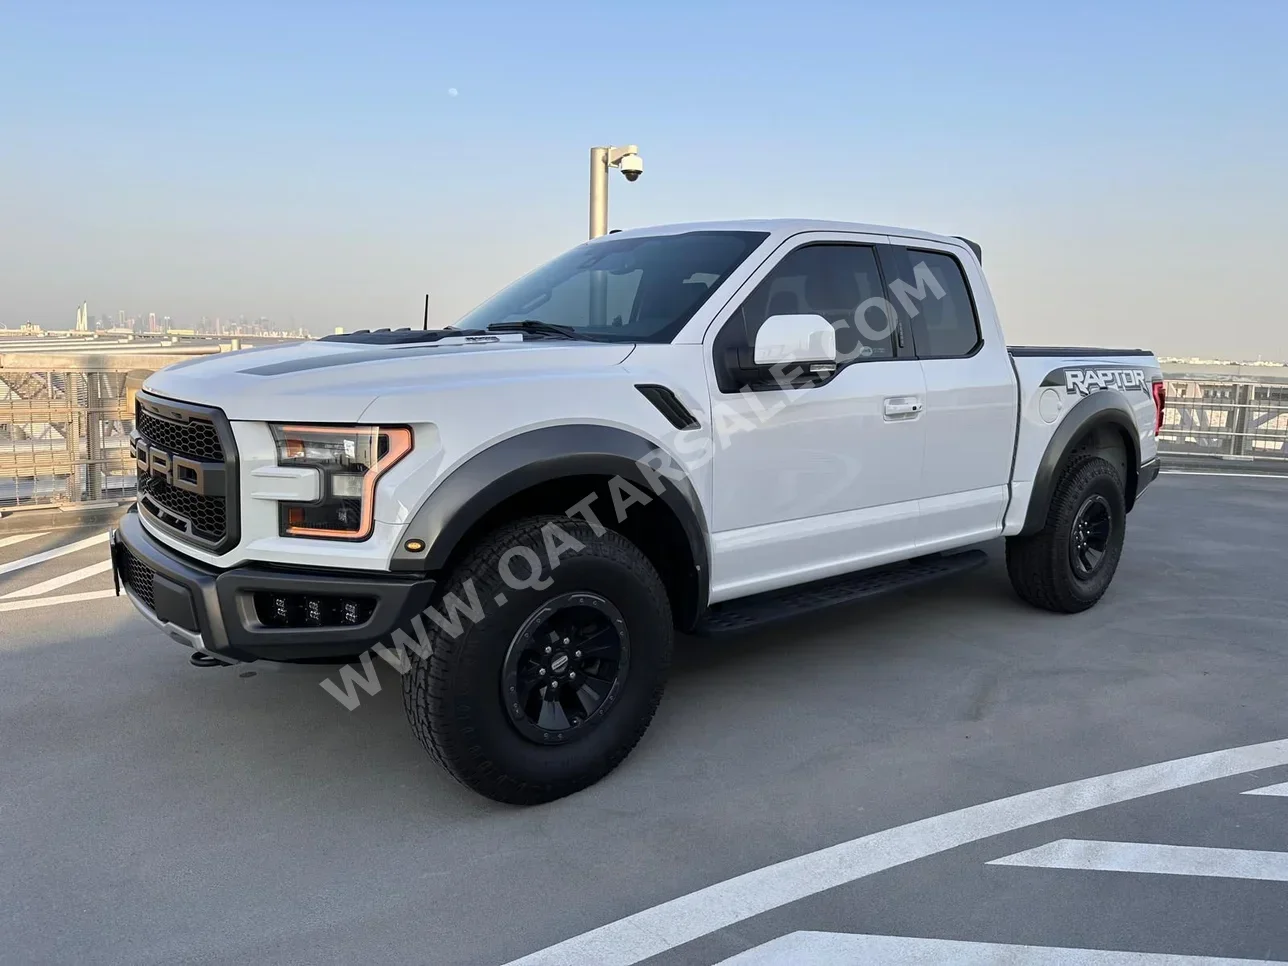 Ford  Raptor  SVT  2018  Automatic  125,000 Km  8 Cylinder  Four Wheel Drive (4WD)  Pick Up  White  With Warranty